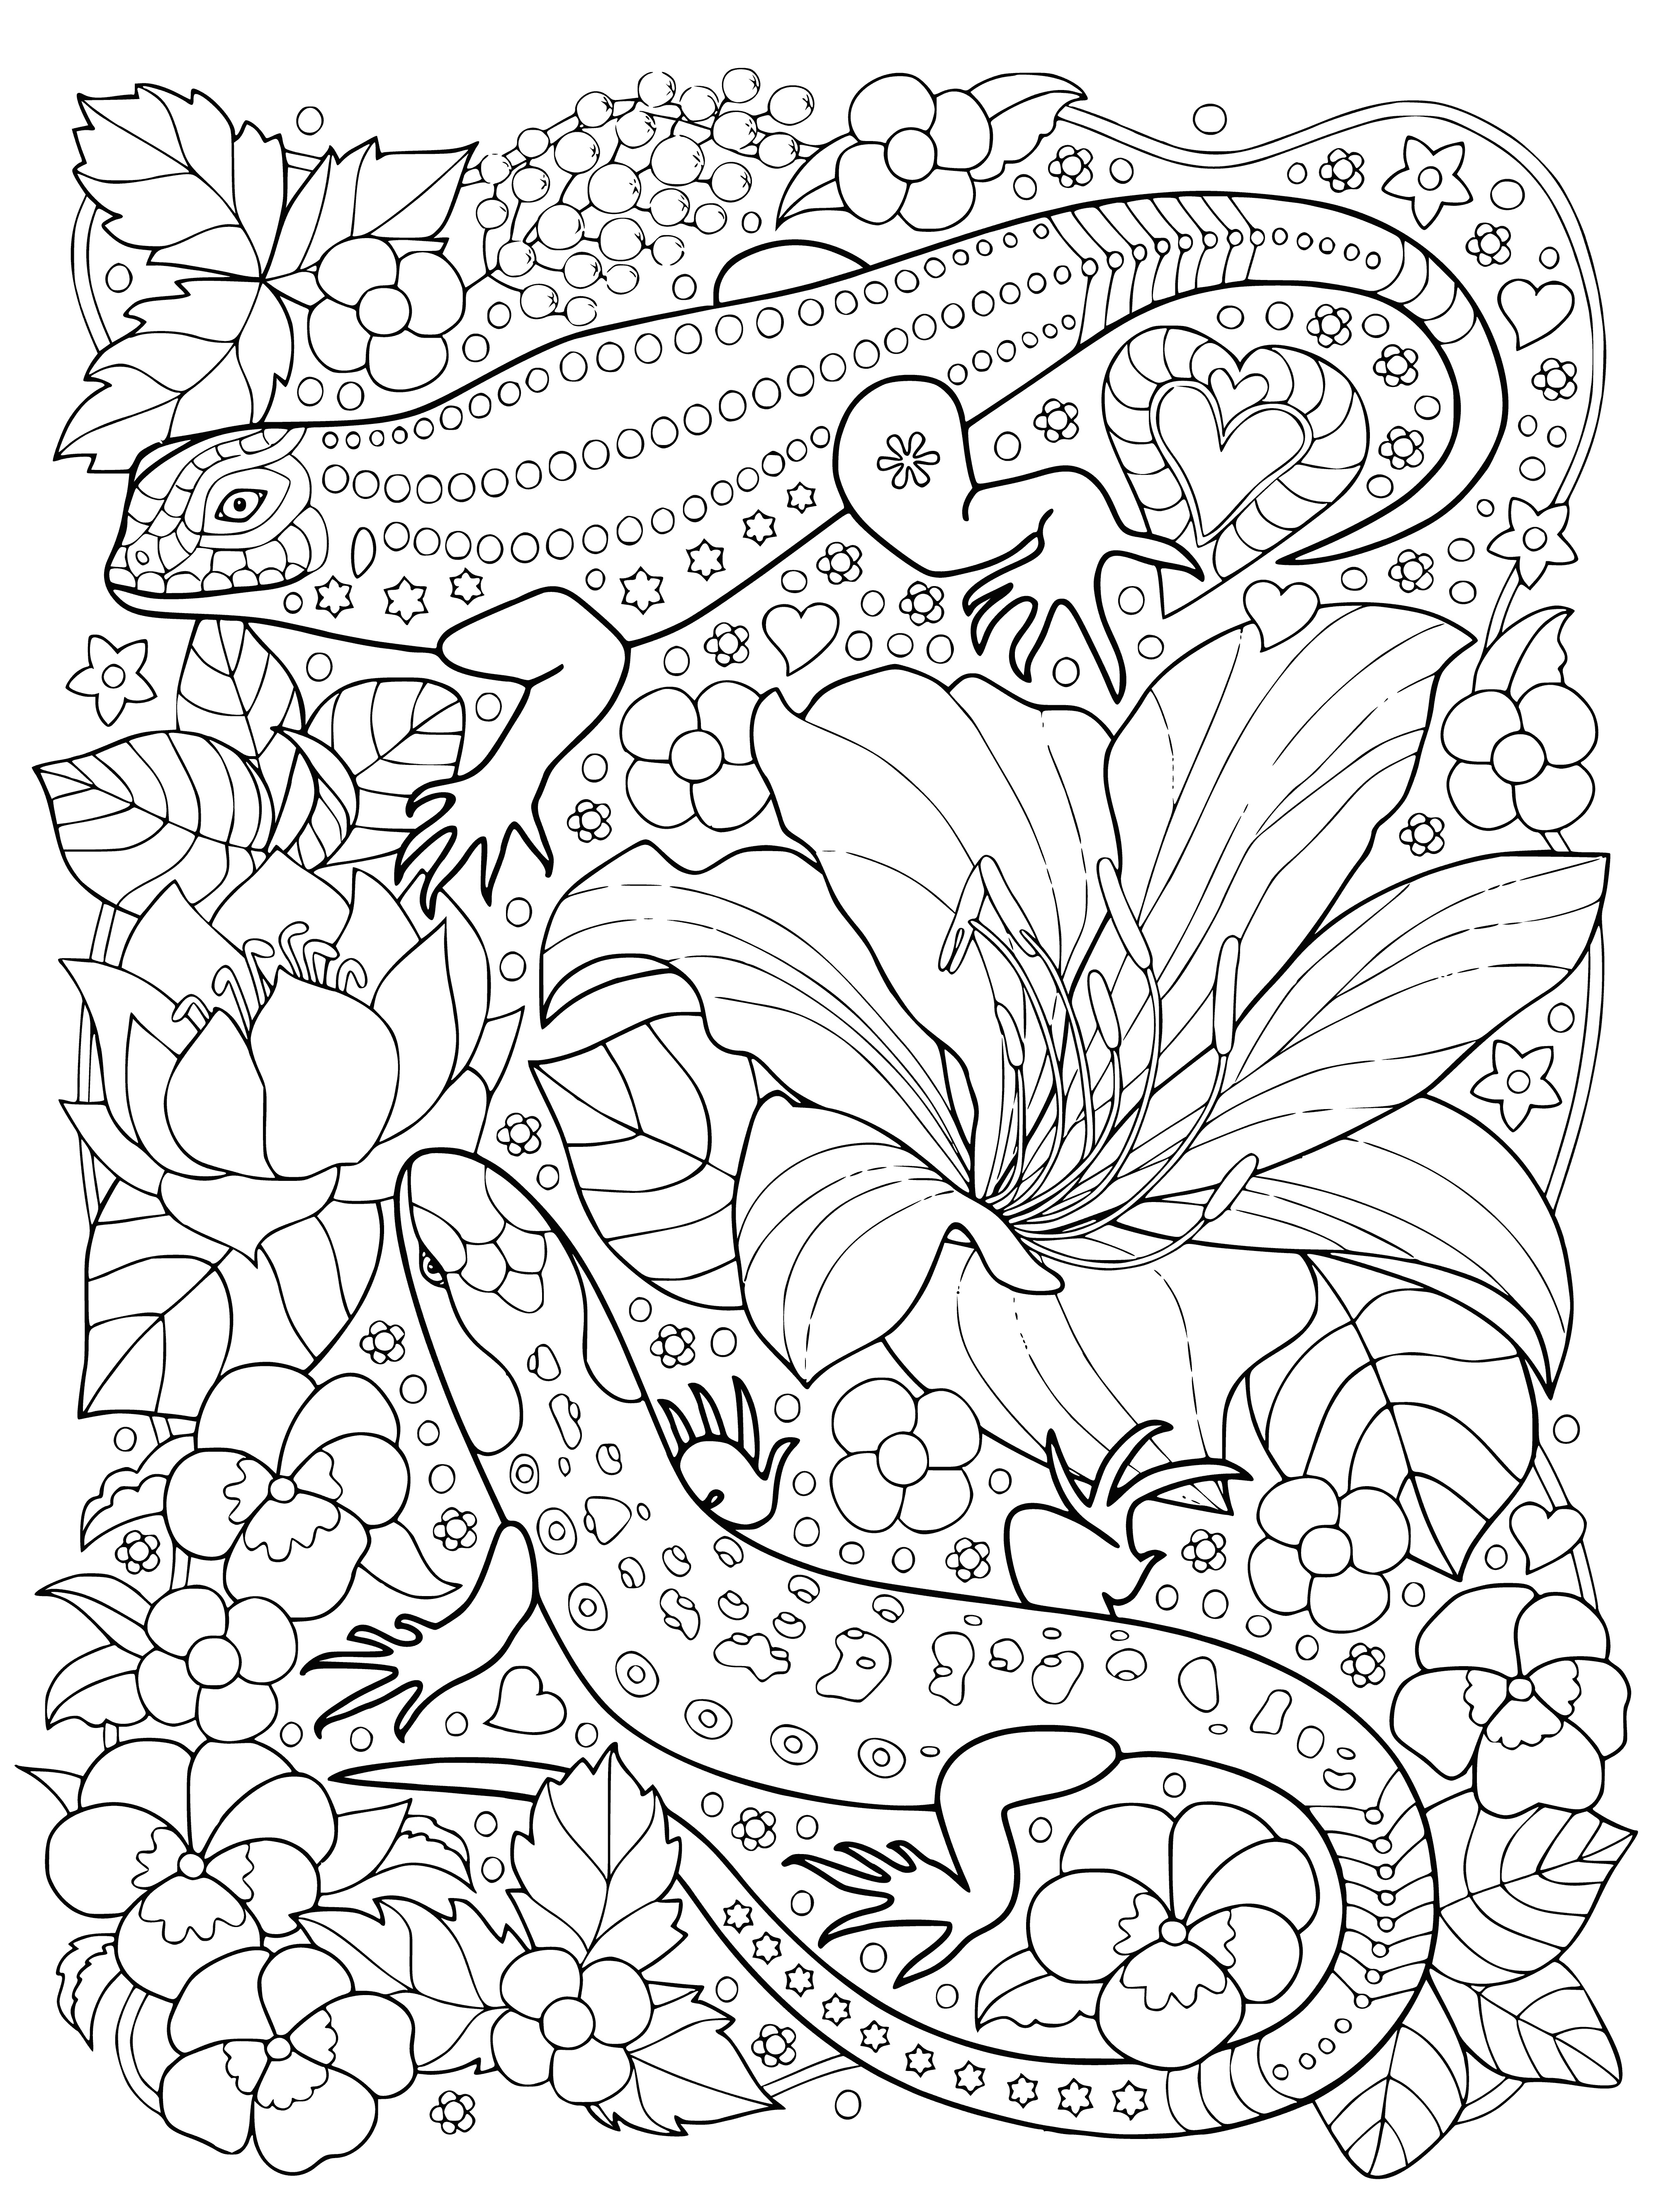 coloring page: Lizard perched on thin branch, tail wrapped around it. Dusty brown body, closed eyes, tongue flicking, small claws gripping branch tightly.